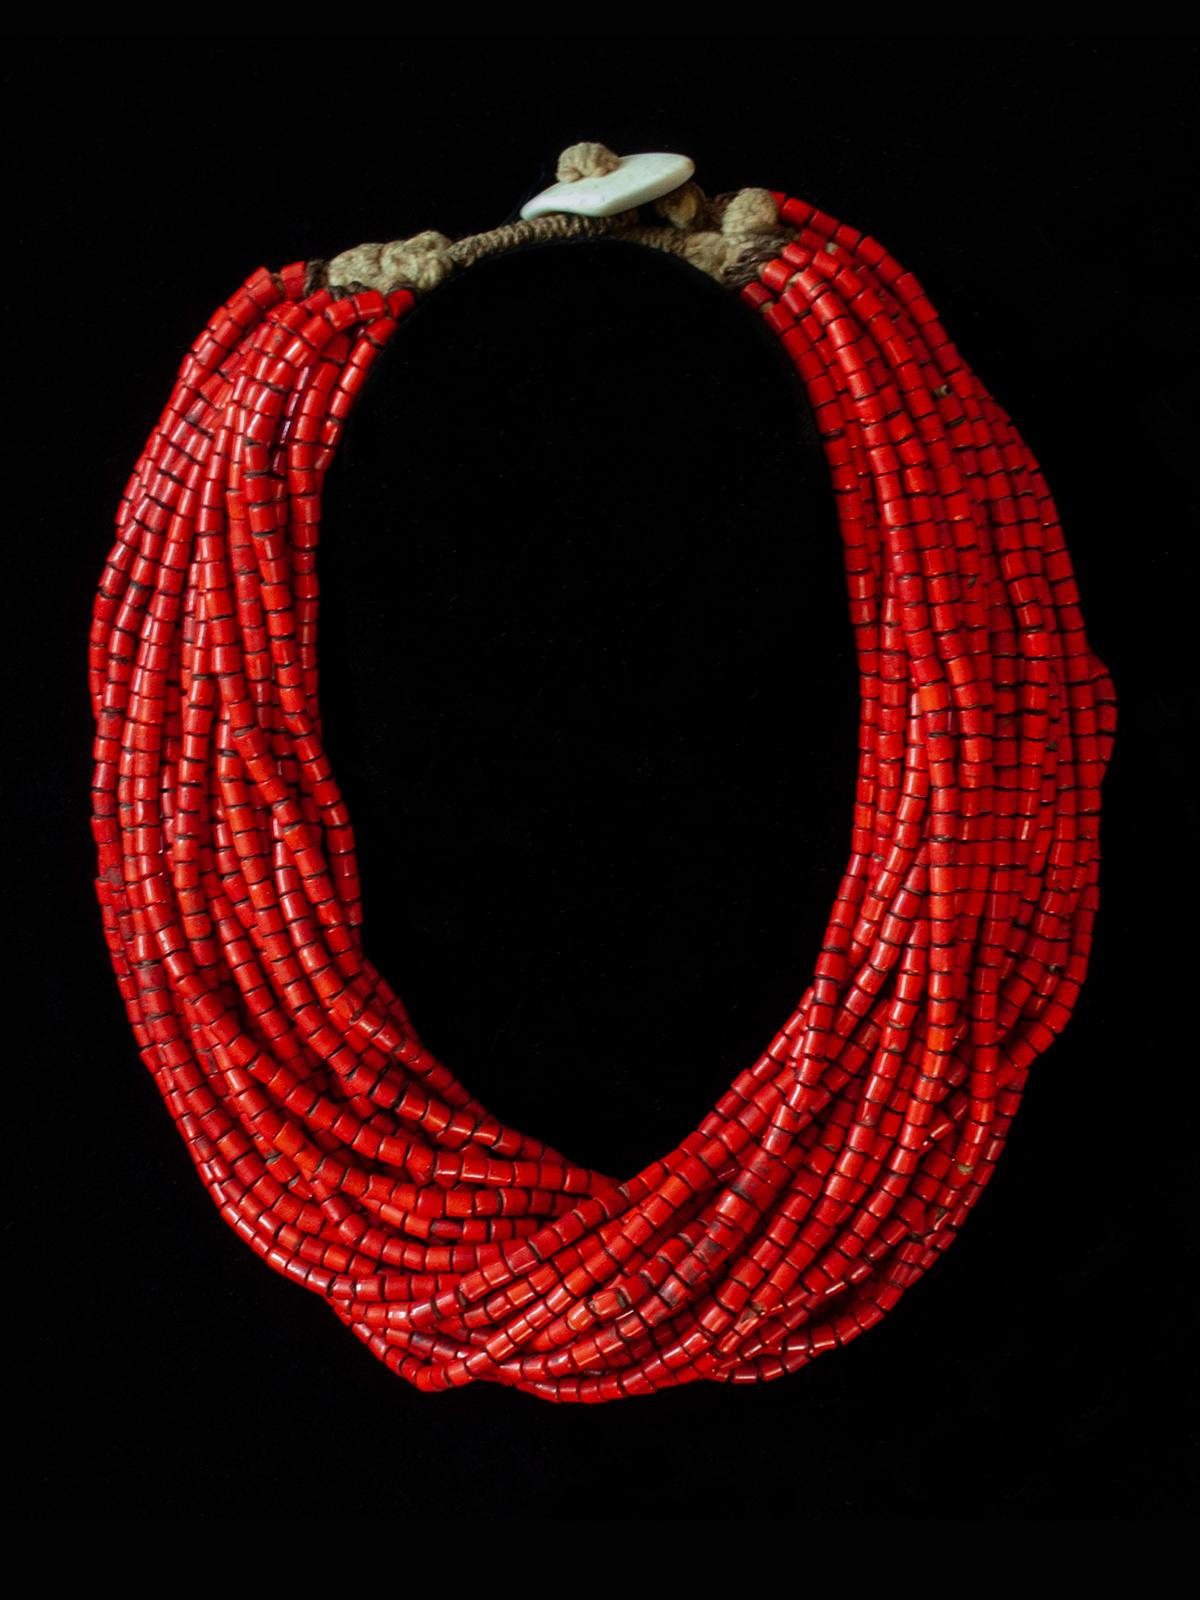 Mid-20th Century Red Glass Beaded Multi-strand Necklace, Naga people, Nagaland, Northeastern India

A thick red beaded necklace from the Naga people of Northeastern India with 26 strands and an old shell clasp.
20 inches (58.8 cm) inner